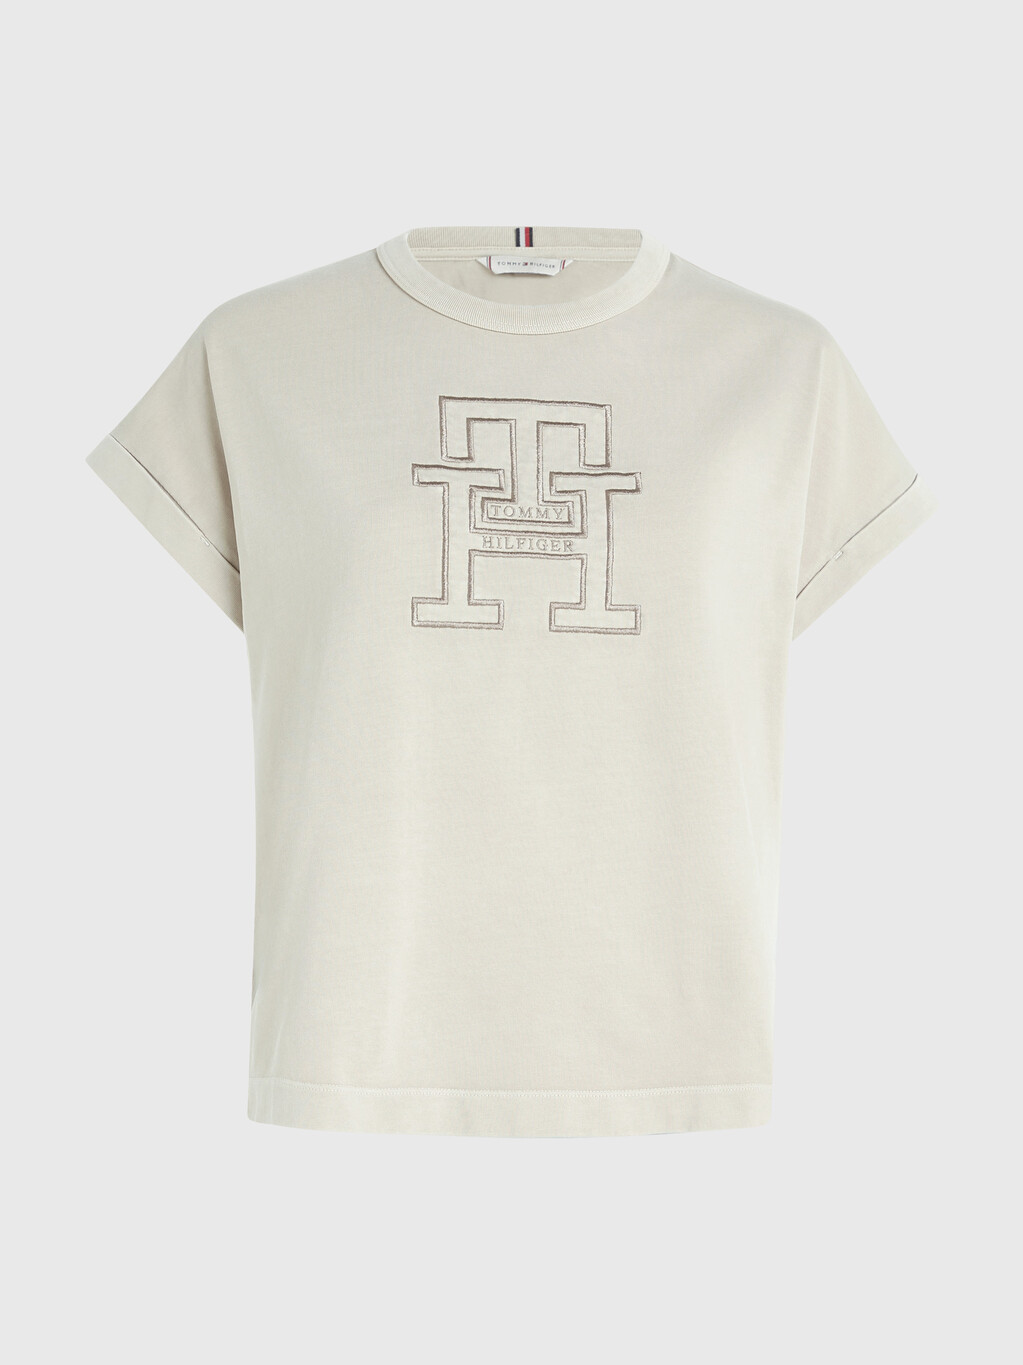 Embroidery Relaxed Fit T-Shirt, Light Sandalwood, hi-res